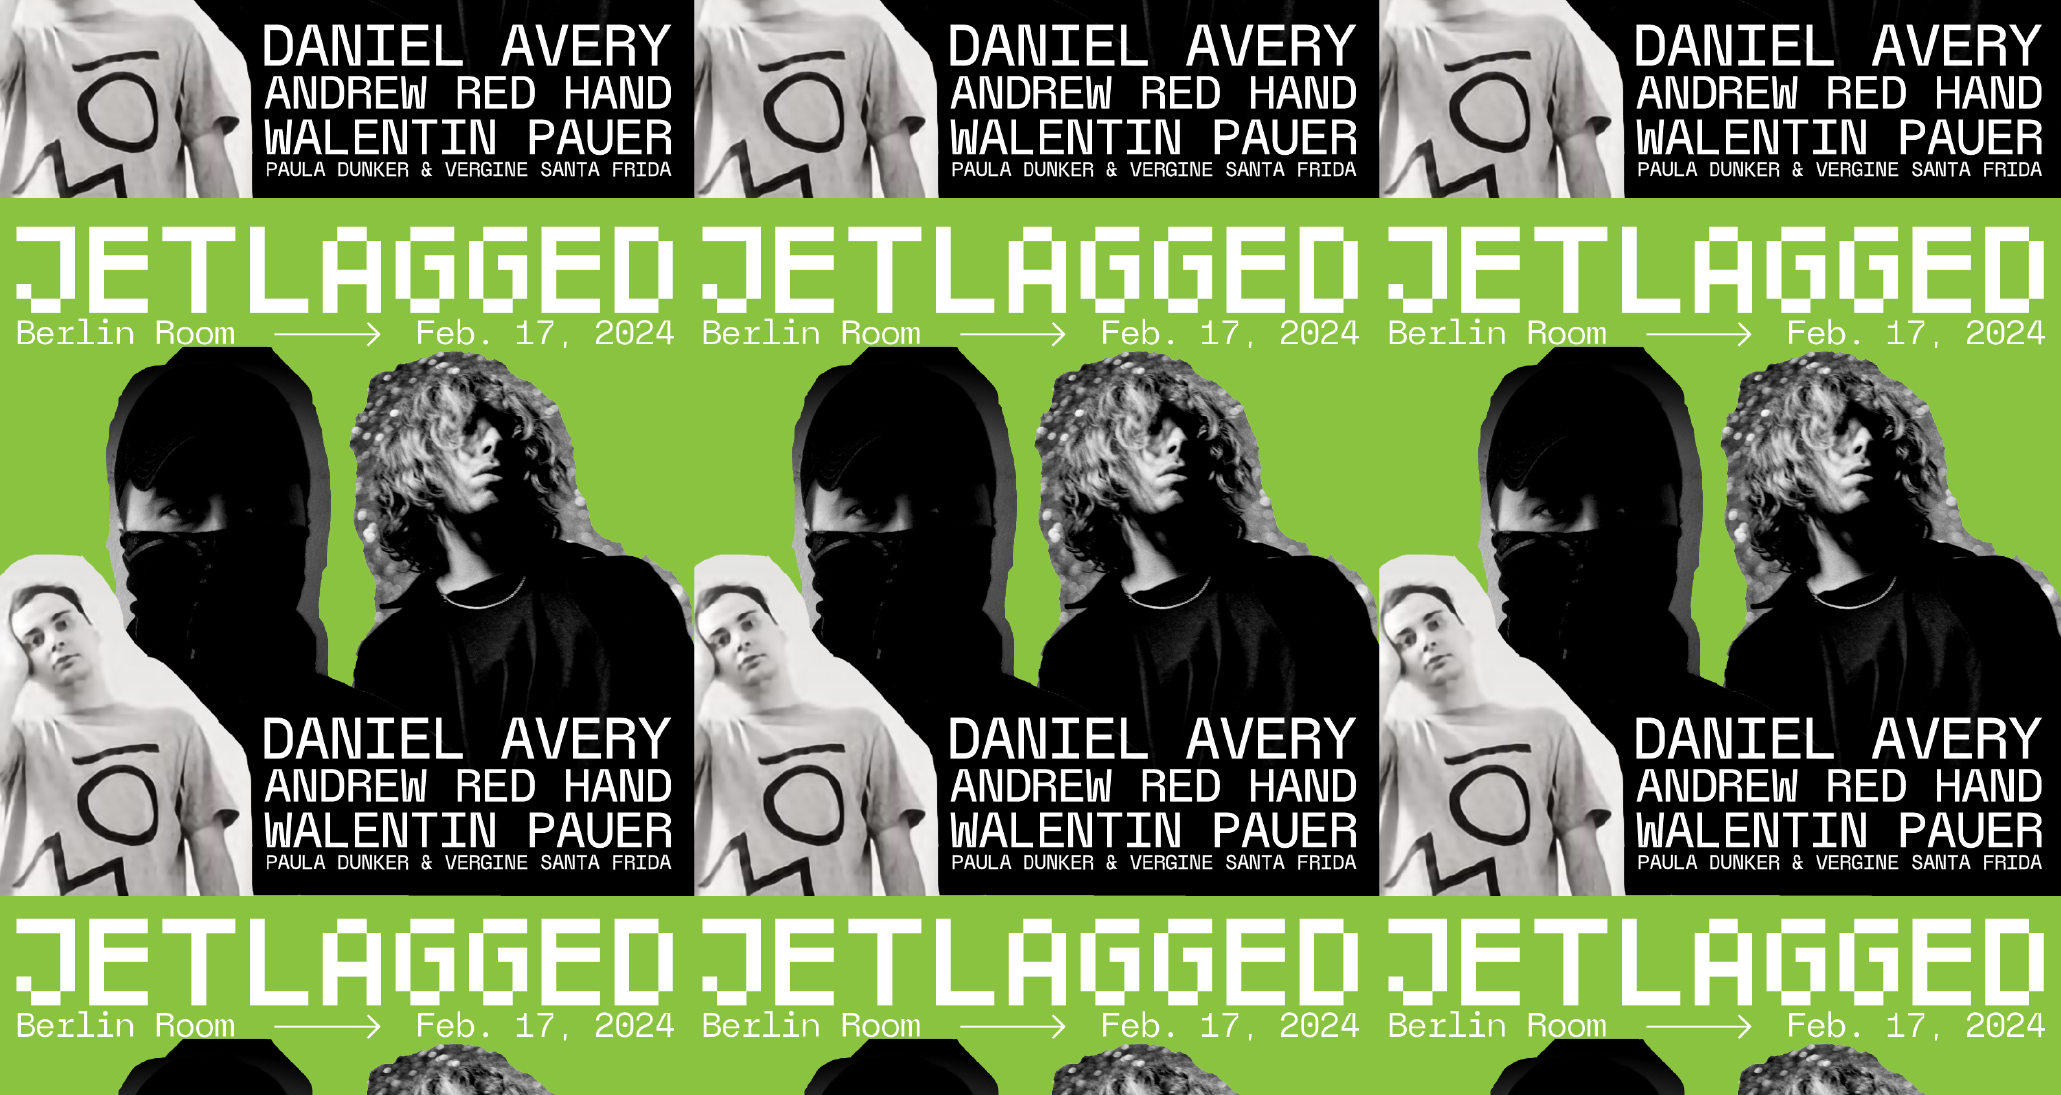 JETLAGGED with Daniel Avery, Andrew Red Hand, Walentin Pauer - フライヤー表